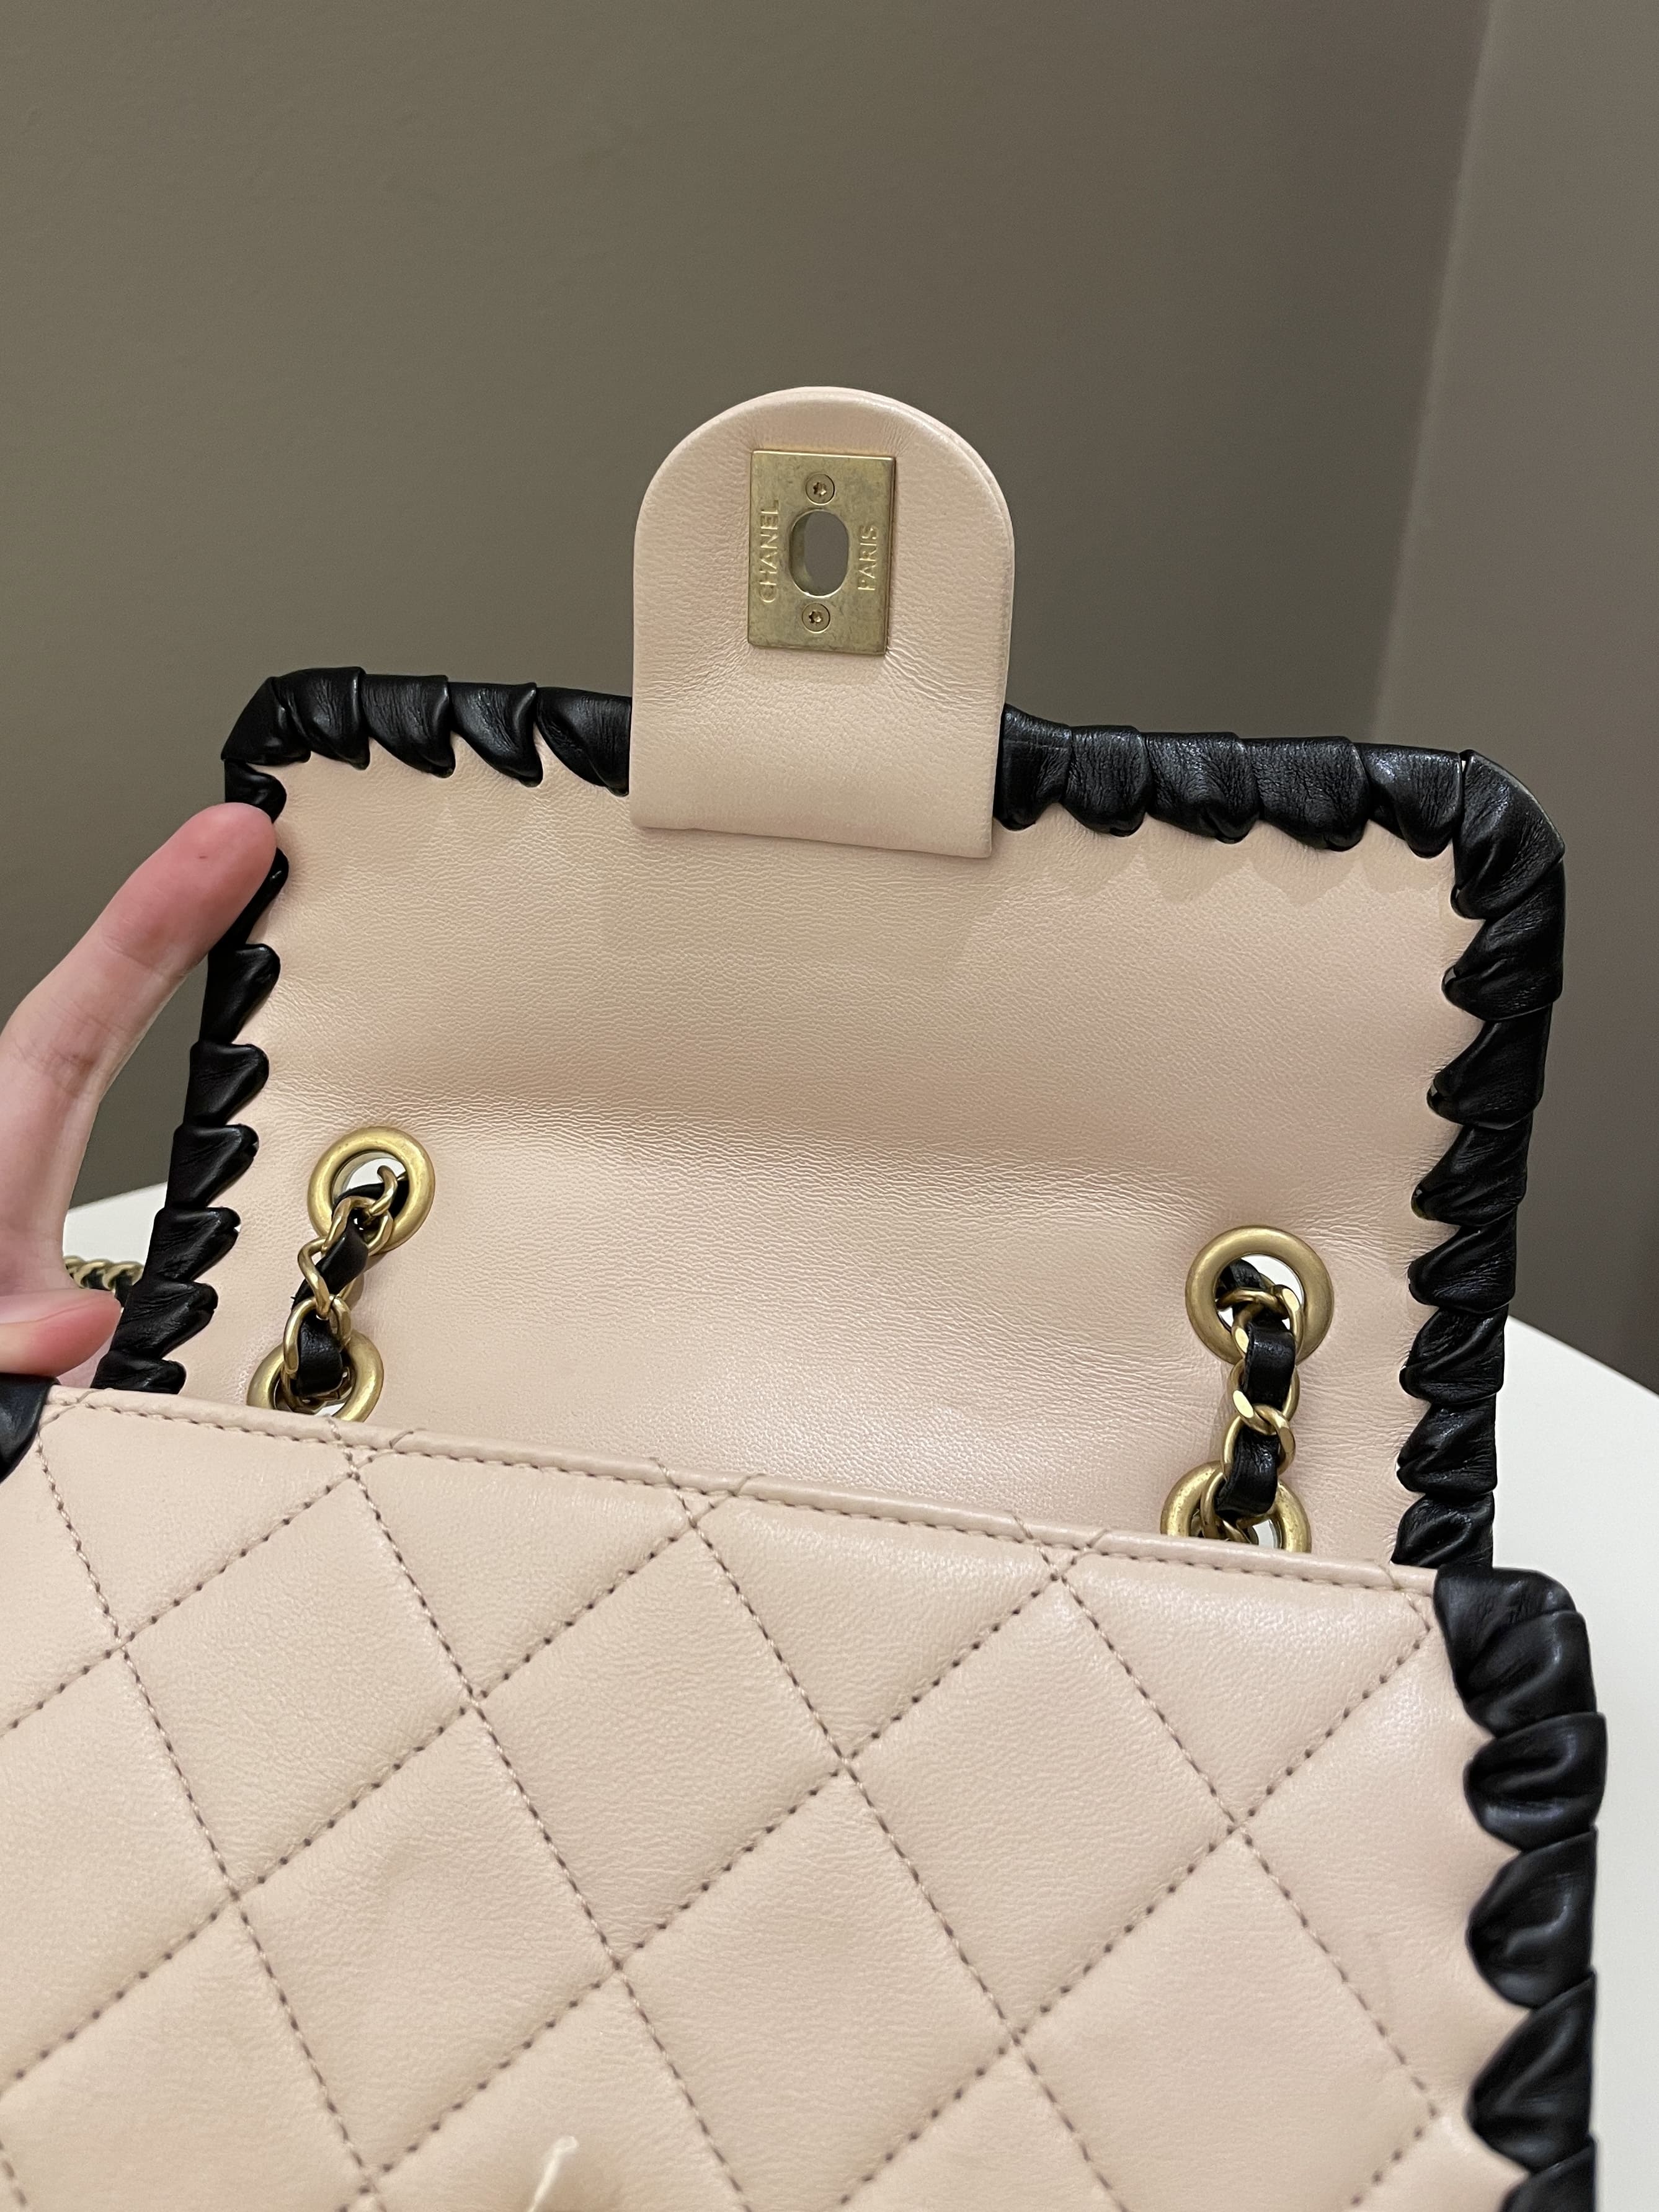 CHANEL WHIPSTITCH FLAP BAG